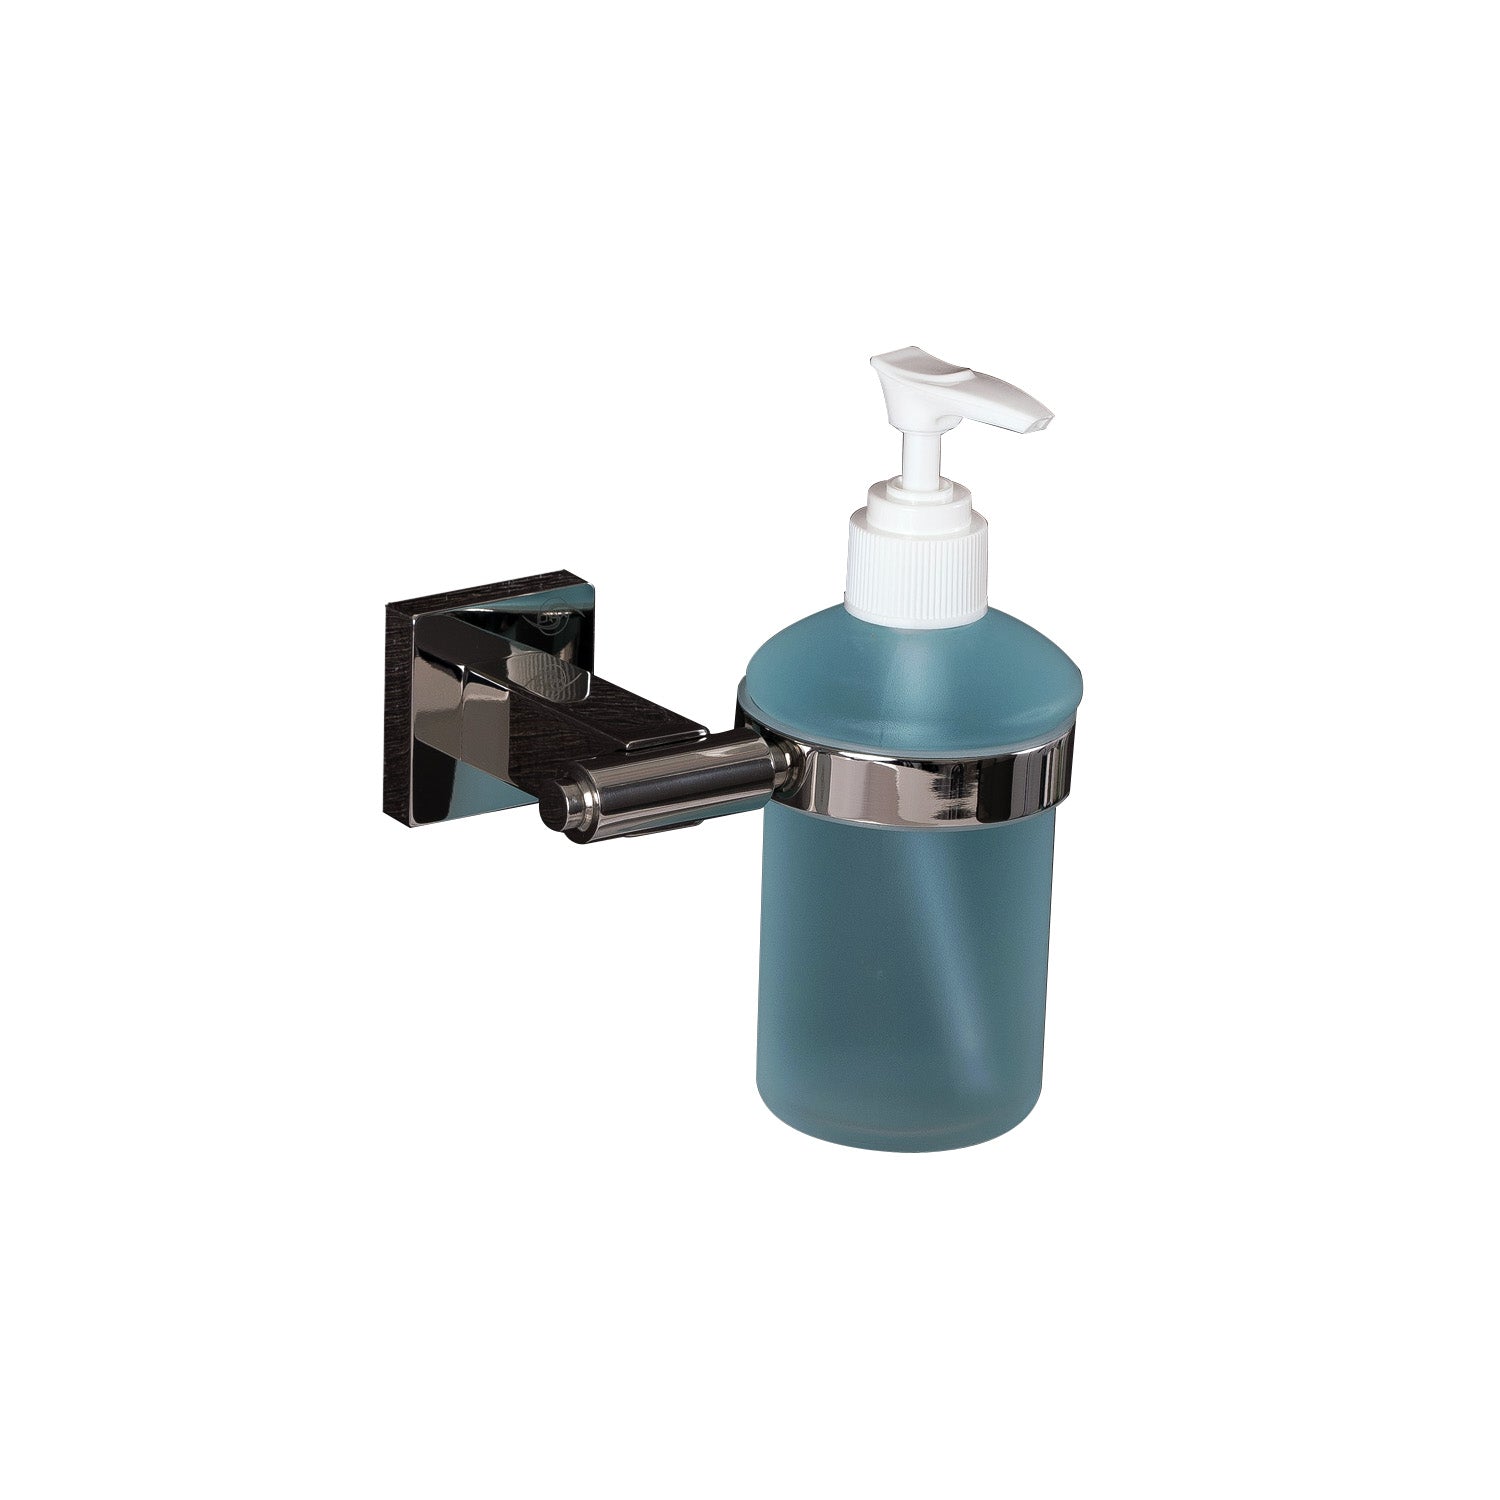 DAX Stainless Steel Soap Dispenser with Glass Bottle, Wall Mount, Satin Finish, 6-1/2 x 4-1/2 x 3-3/4 Inches (DAX-G0113-S)